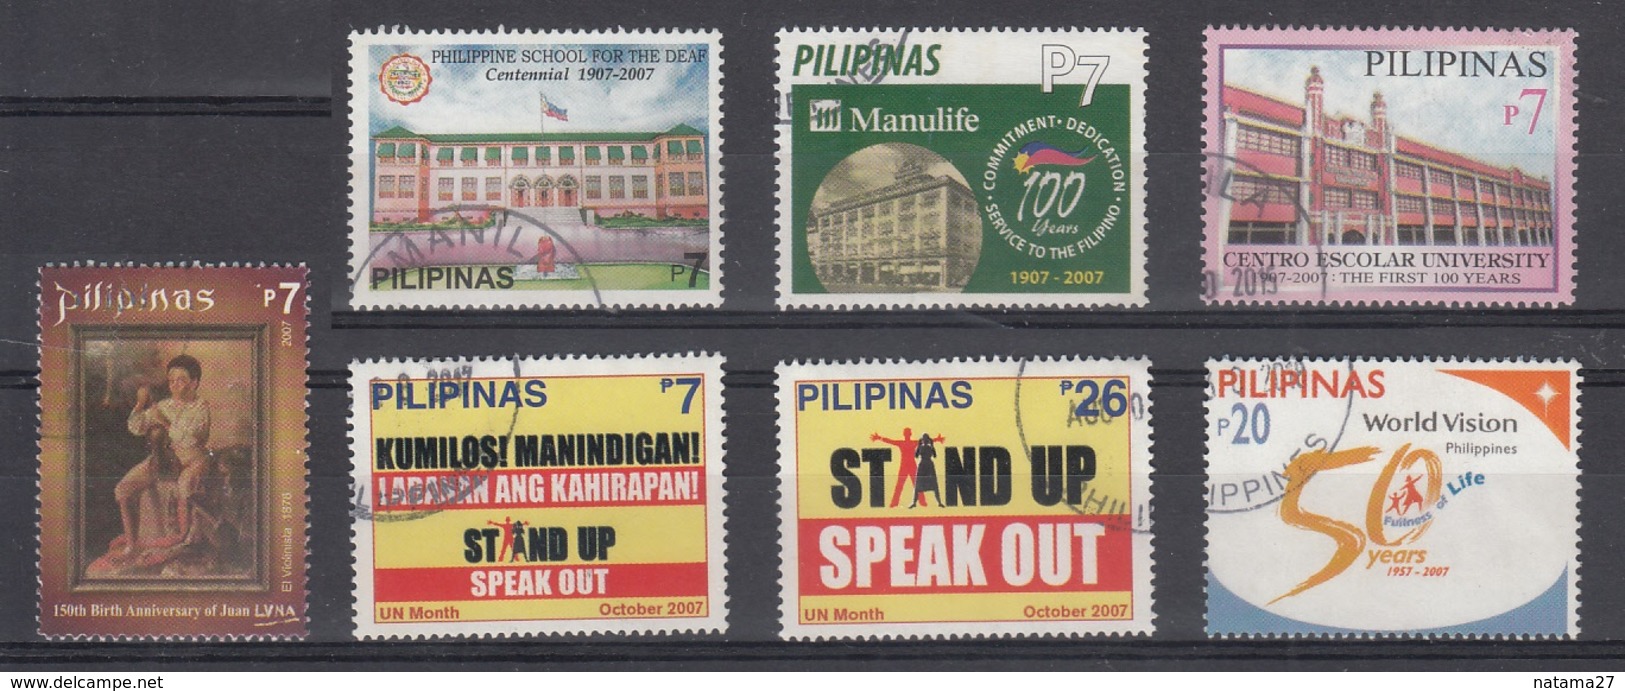 Filippine Philippines Philippinen Pilipinas 2007 Philippine 7 Stamps, Incomplete Sets - USED (see Photo) - Philippines